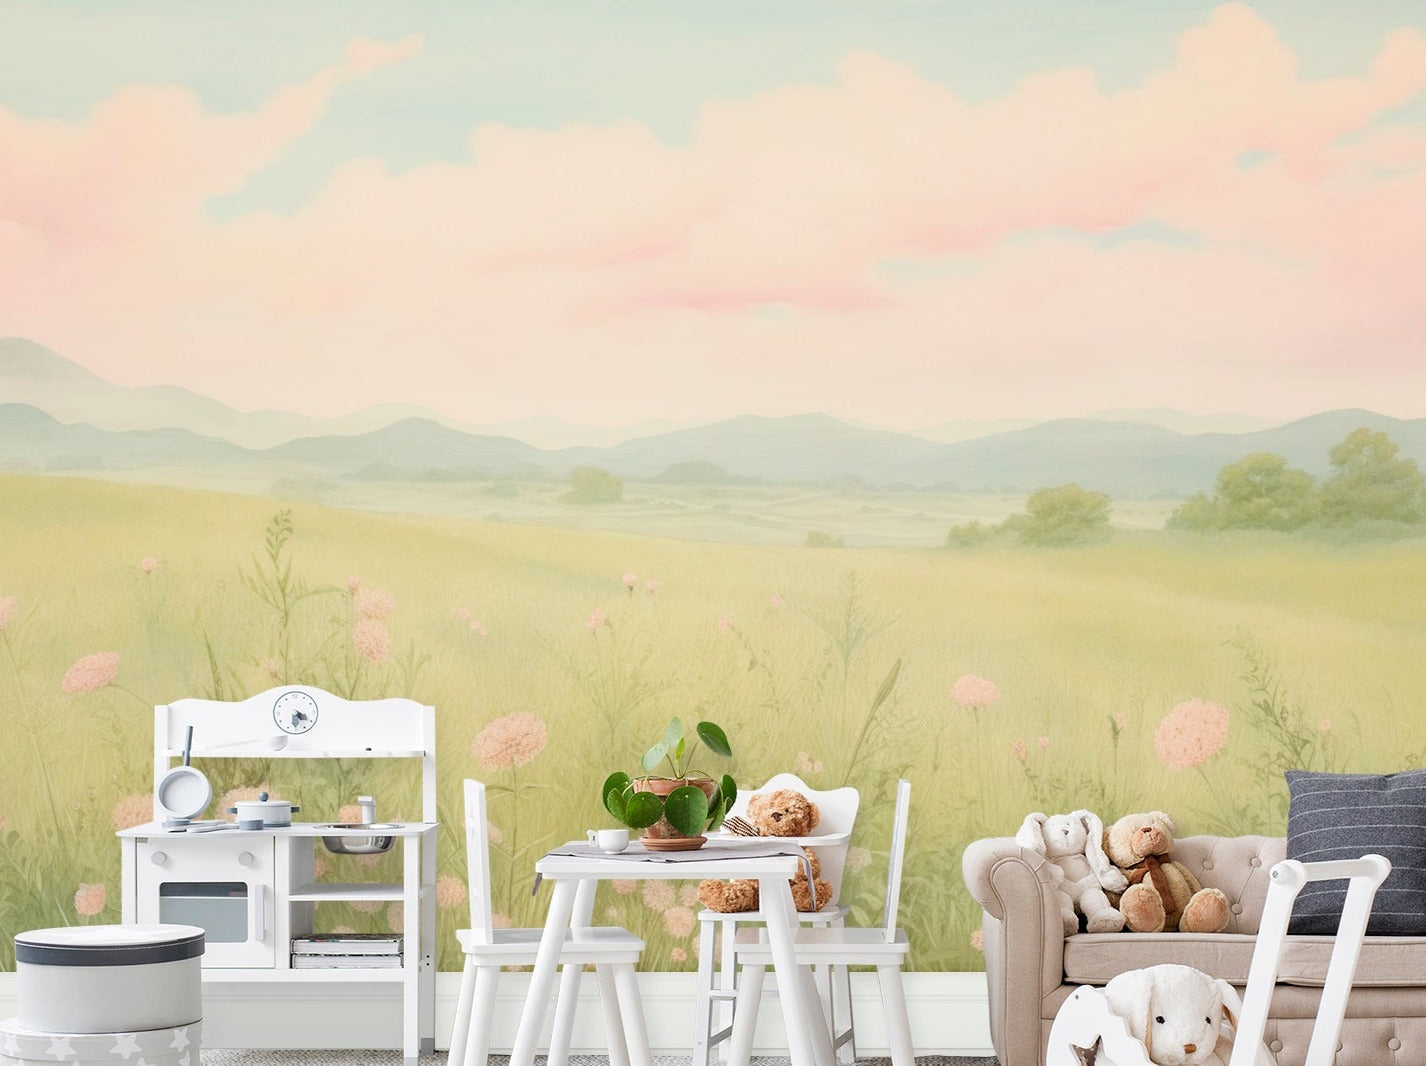 "Pastel Colored Countryside Mural in Children's Playroom with Plush Toys and White Furniture"